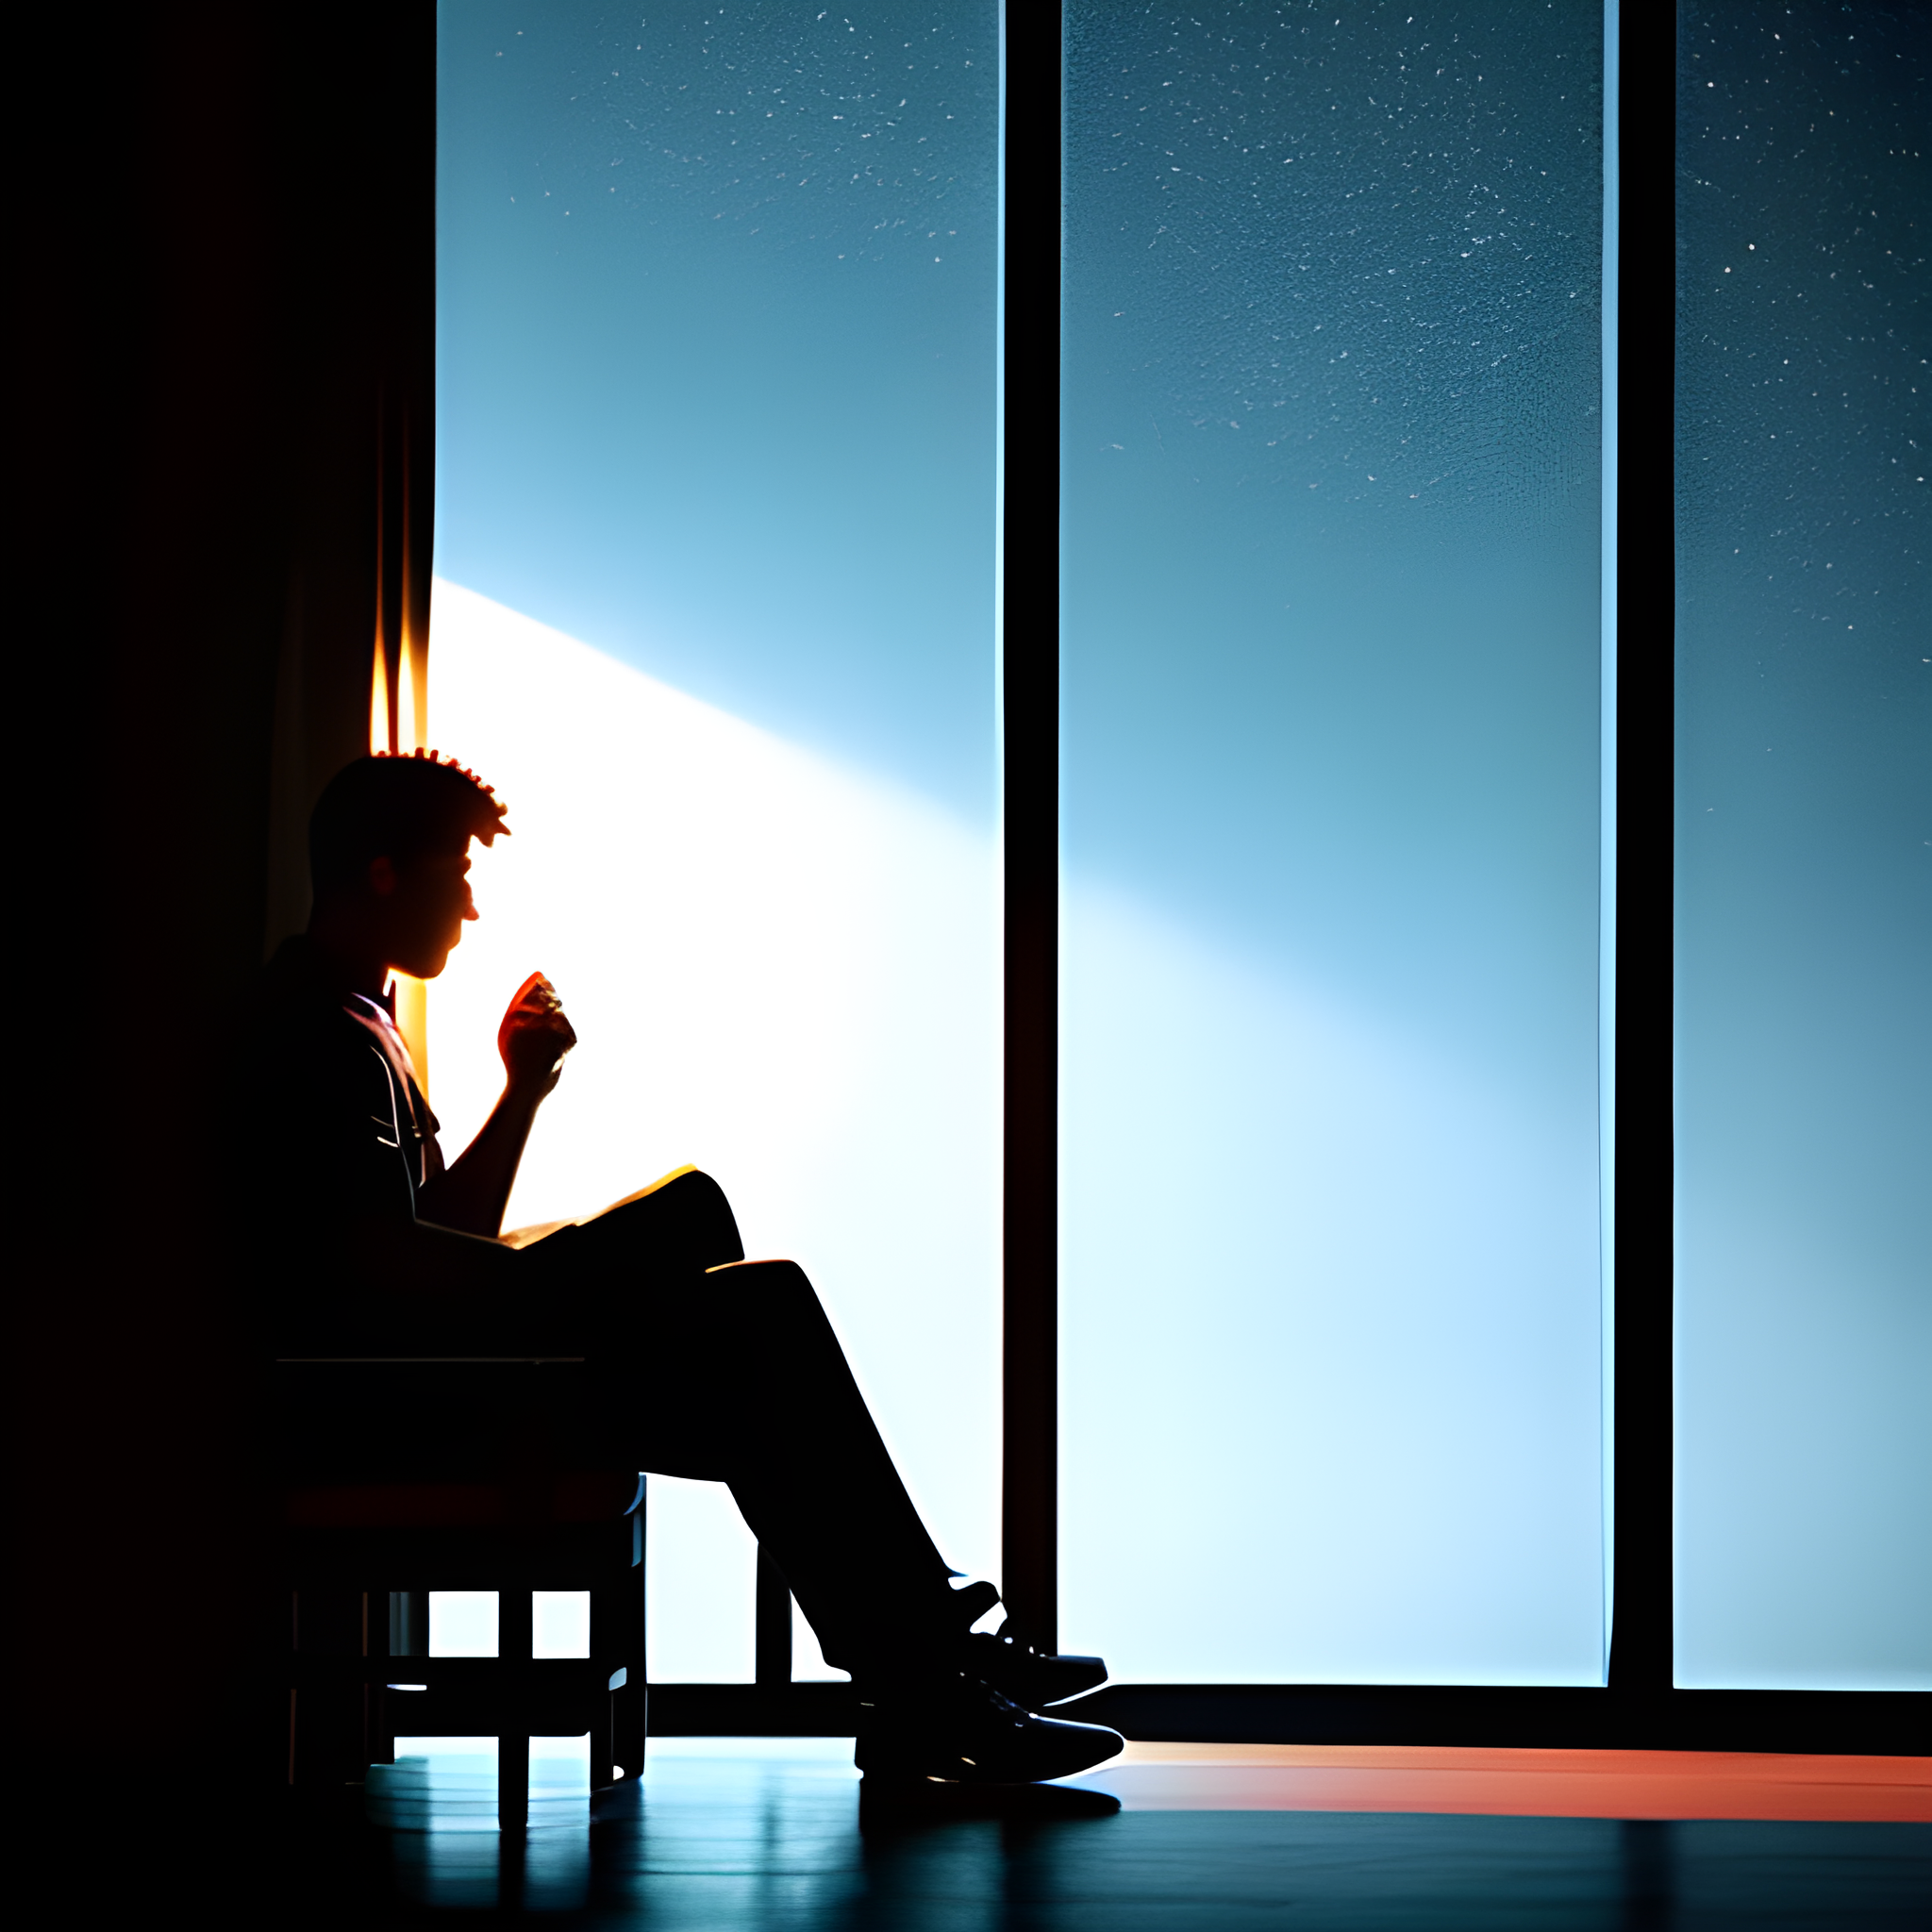 guy-sits-alone-at-night-light-coming-through-window-and-sad-memories-engulf-him